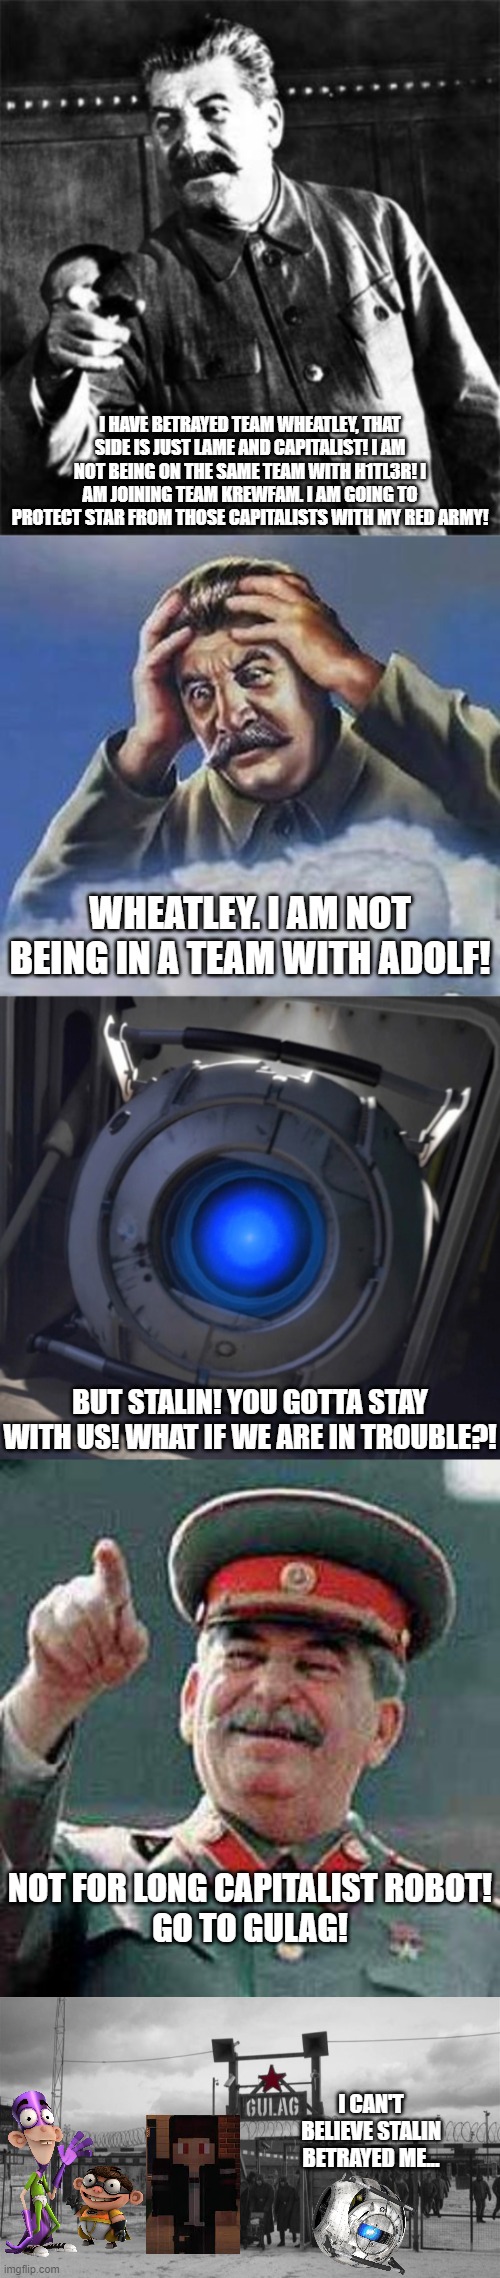 Stalin Betrays Team Whe*tly for Team Krewfam | I HAVE BETRAYED TEAM WHEATLEY, THAT SIDE IS JUST LAME AND CAPITALIST! I AM NOT BEING ON THE SAME TEAM WITH H1TL3R! I AM JOINING TEAM KREWFAM. I AM GOING TO PROTECT STAR FROM THOSE CAPITALISTS WITH MY RED ARMY! WHEATLEY. I AM NOT BEING IN A TEAM WITH ADOLF! BUT STALIN! YOU GOTTA STAY WITH US! WHAT IF WE ARE IN TROUBLE?! NOT FOR LONG CAPITALIST ROBOT!
GO TO GULAG! I CAN'T BELIEVE STALIN BETRAYED ME... | image tagged in stalin,worrying stalin,wheatley,stalin says,gulag | made w/ Imgflip meme maker